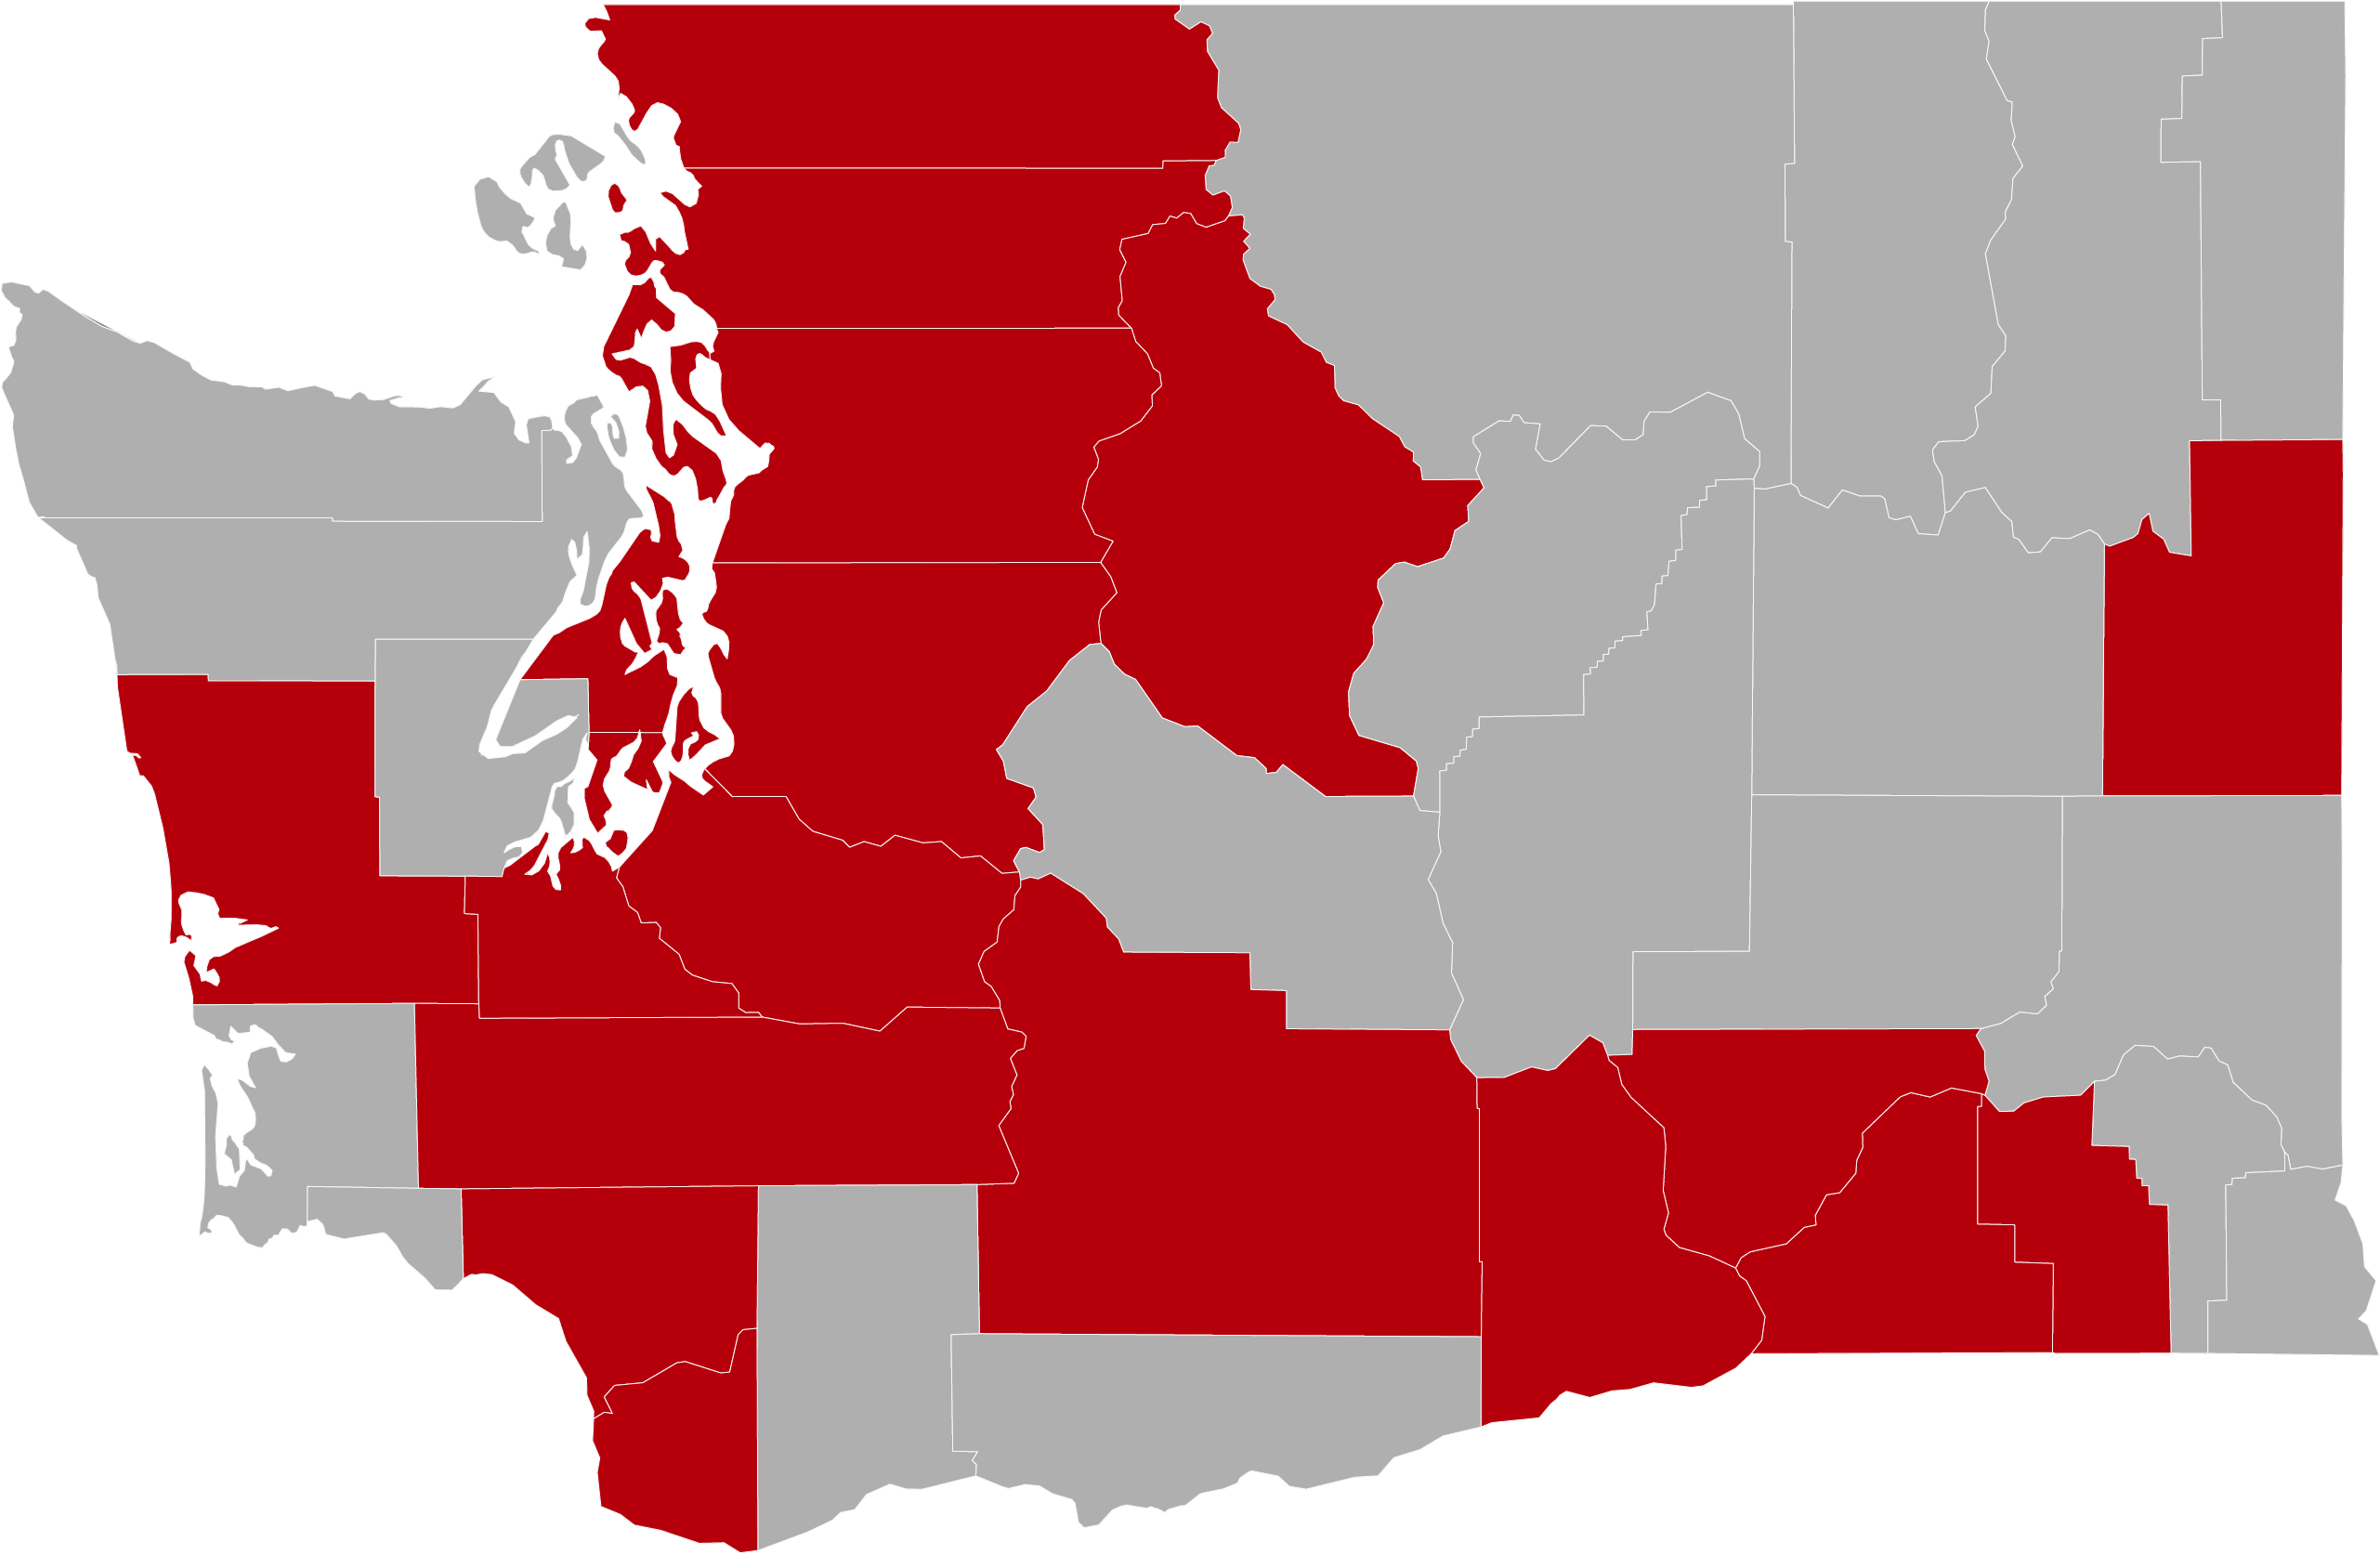 Washington state map with 19 counties colored in red to represent EnhanceFitness.